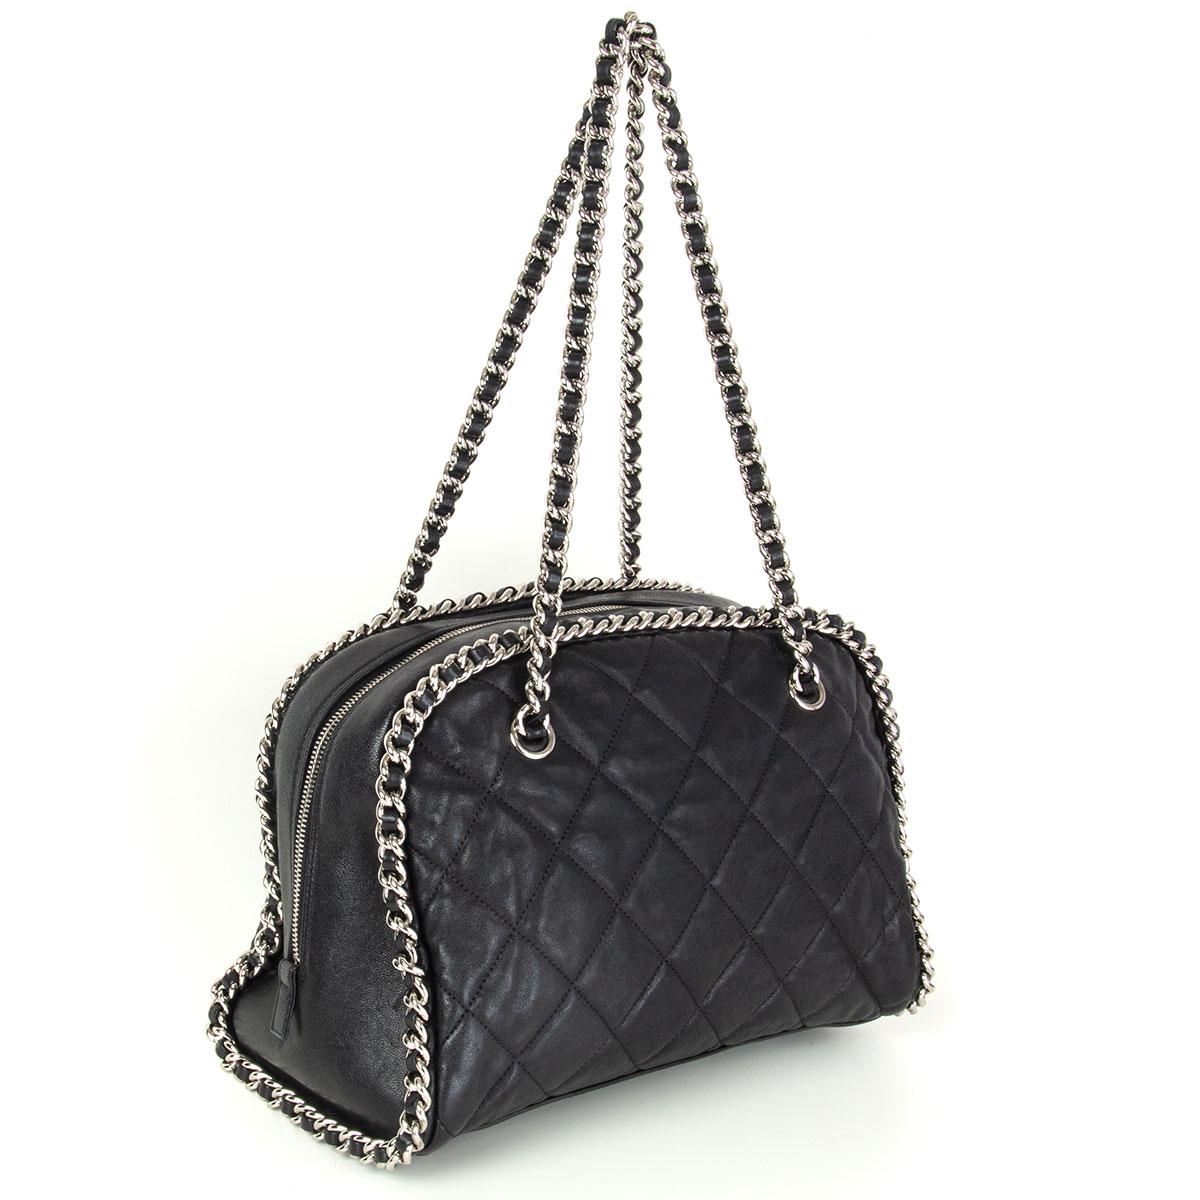 Chanel 'Chain Around Bowler' shoulder bag in black quilted calfskin featuring a silver-tone metal chain edging and shoulder straps. Opens with a zipper on top and is lined light grey nylon with one zipper pocket against the back and two open pockets